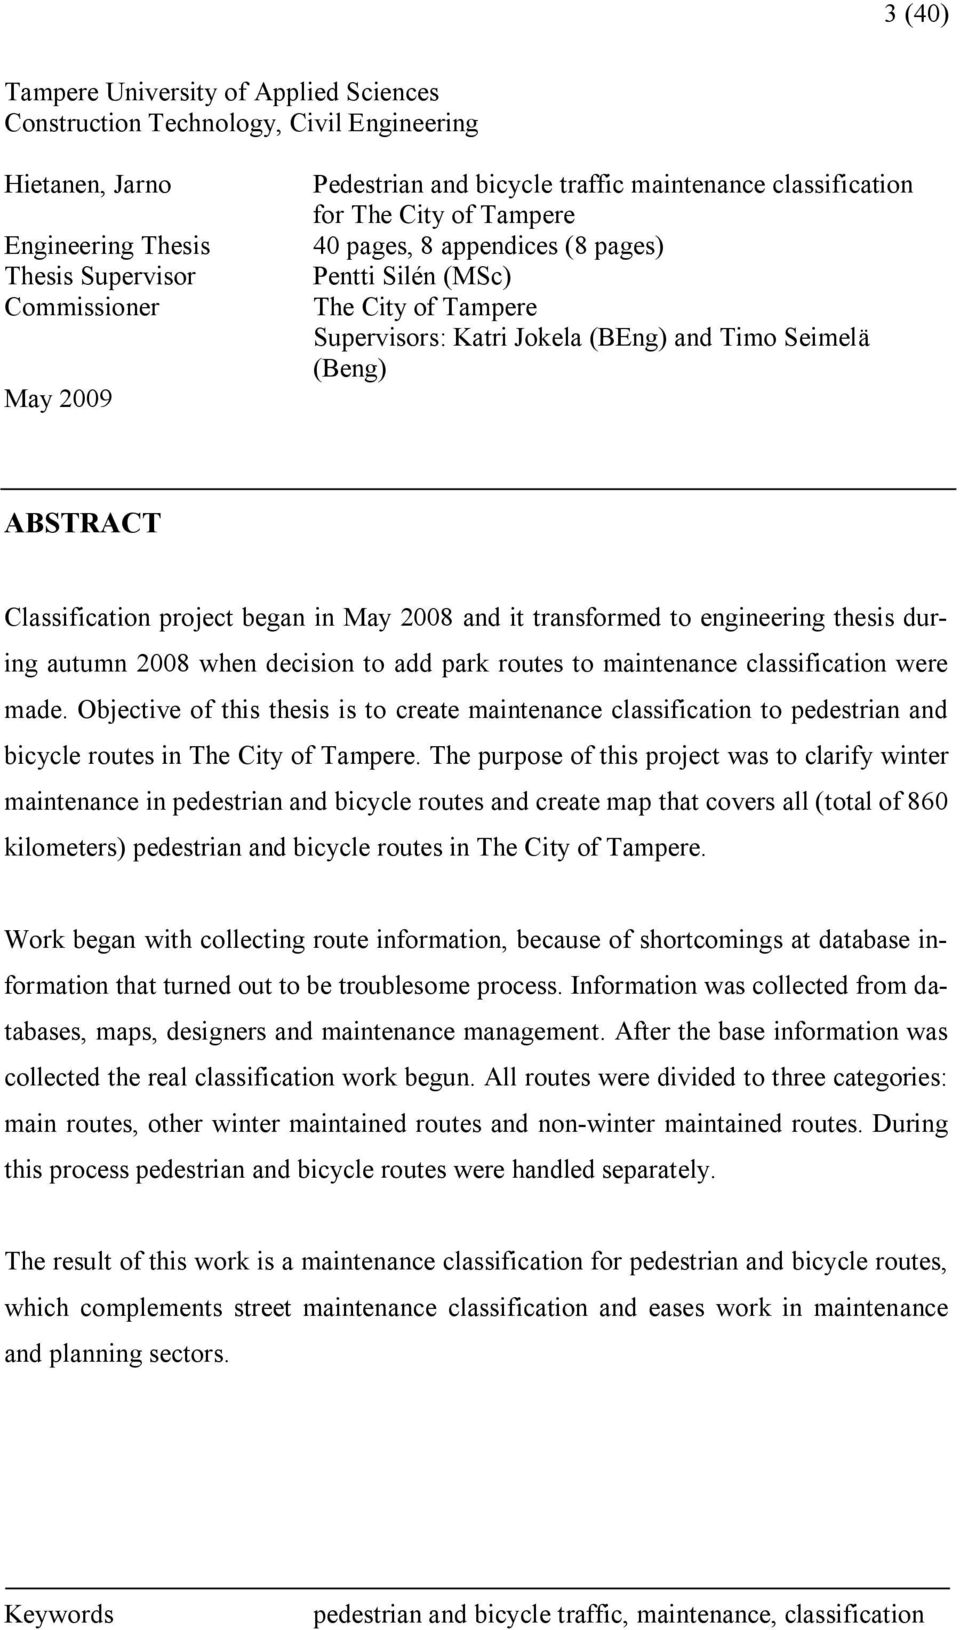 Classification project began in May 2008 and it transformed to engineering thesis during autumn 2008 when decision to add park routes to maintenance classification were made.